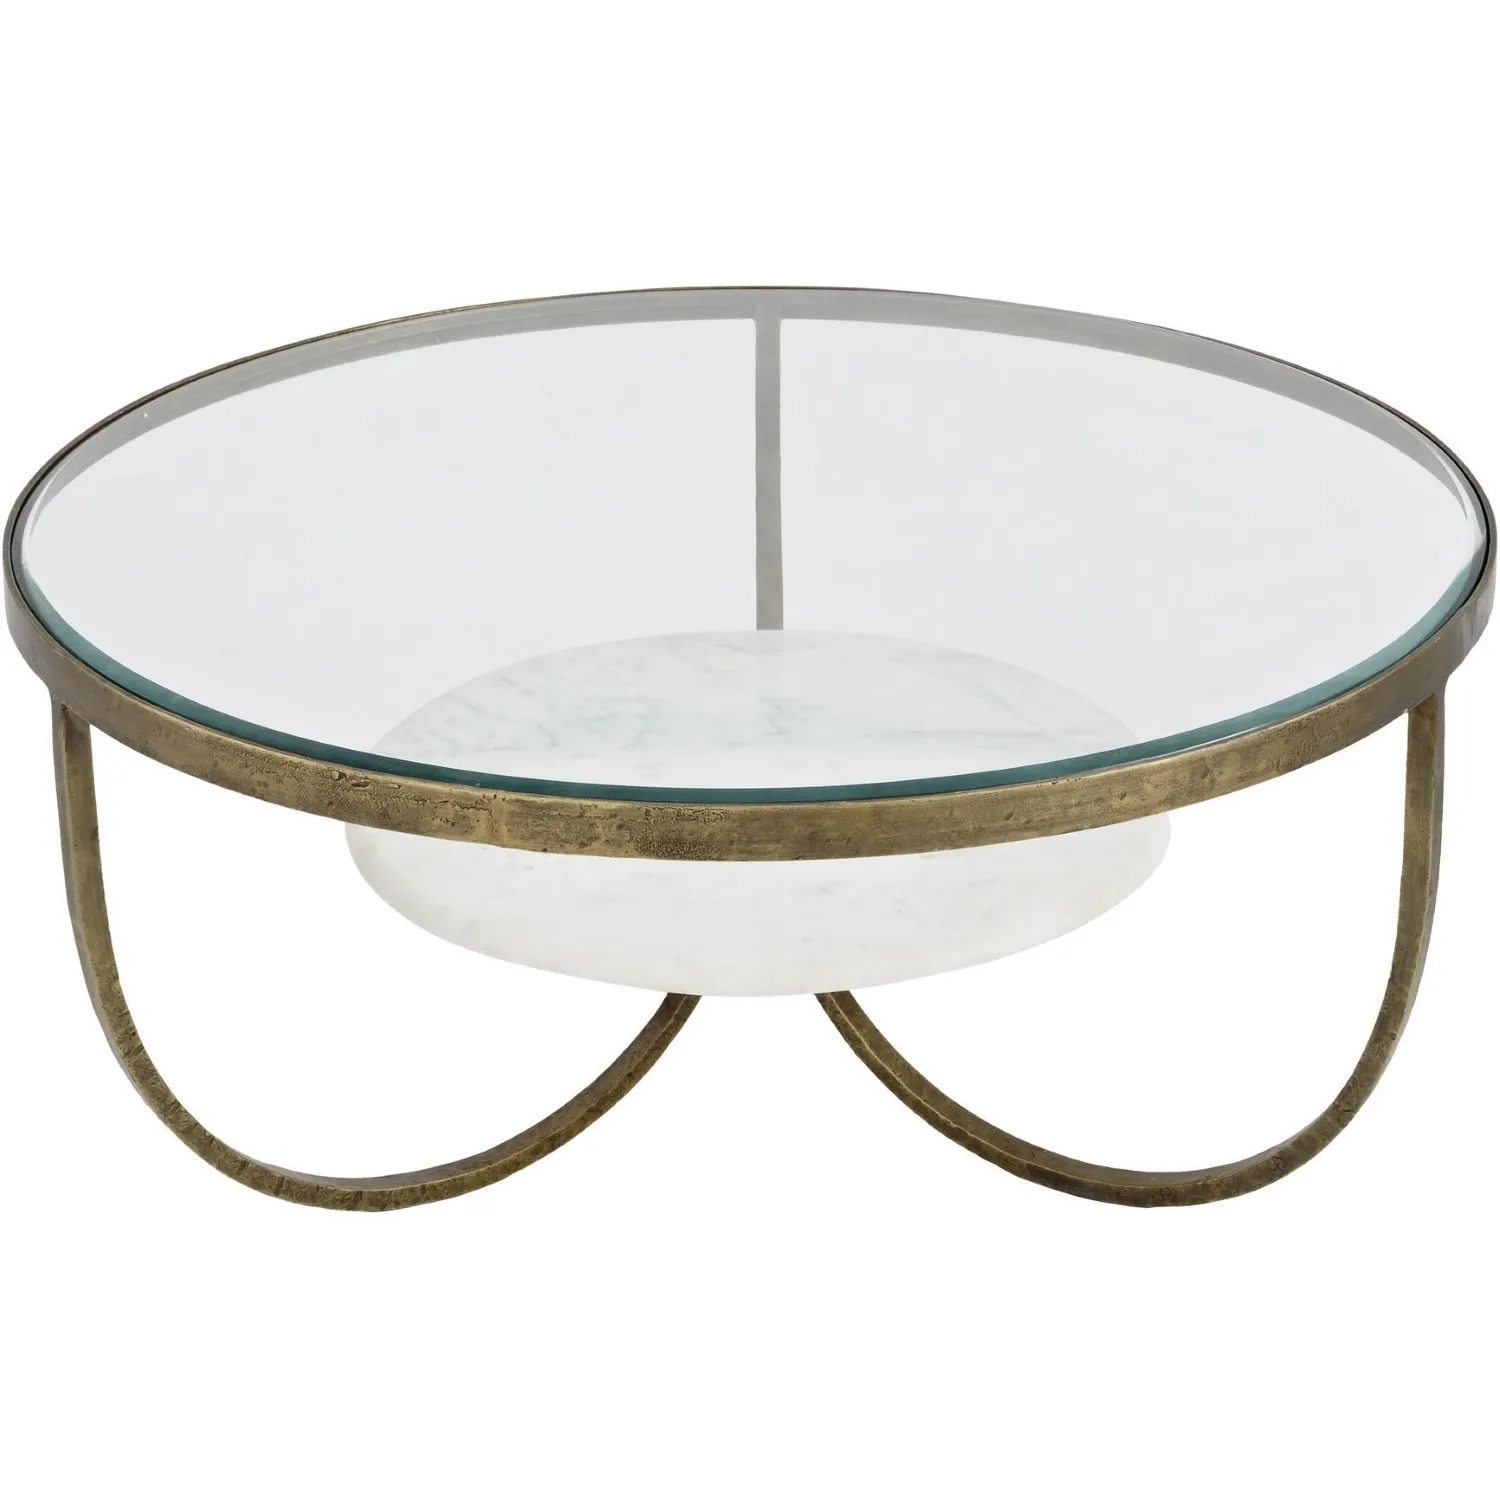 Gold Metal Round Glass Coffee Table with White Marble Base